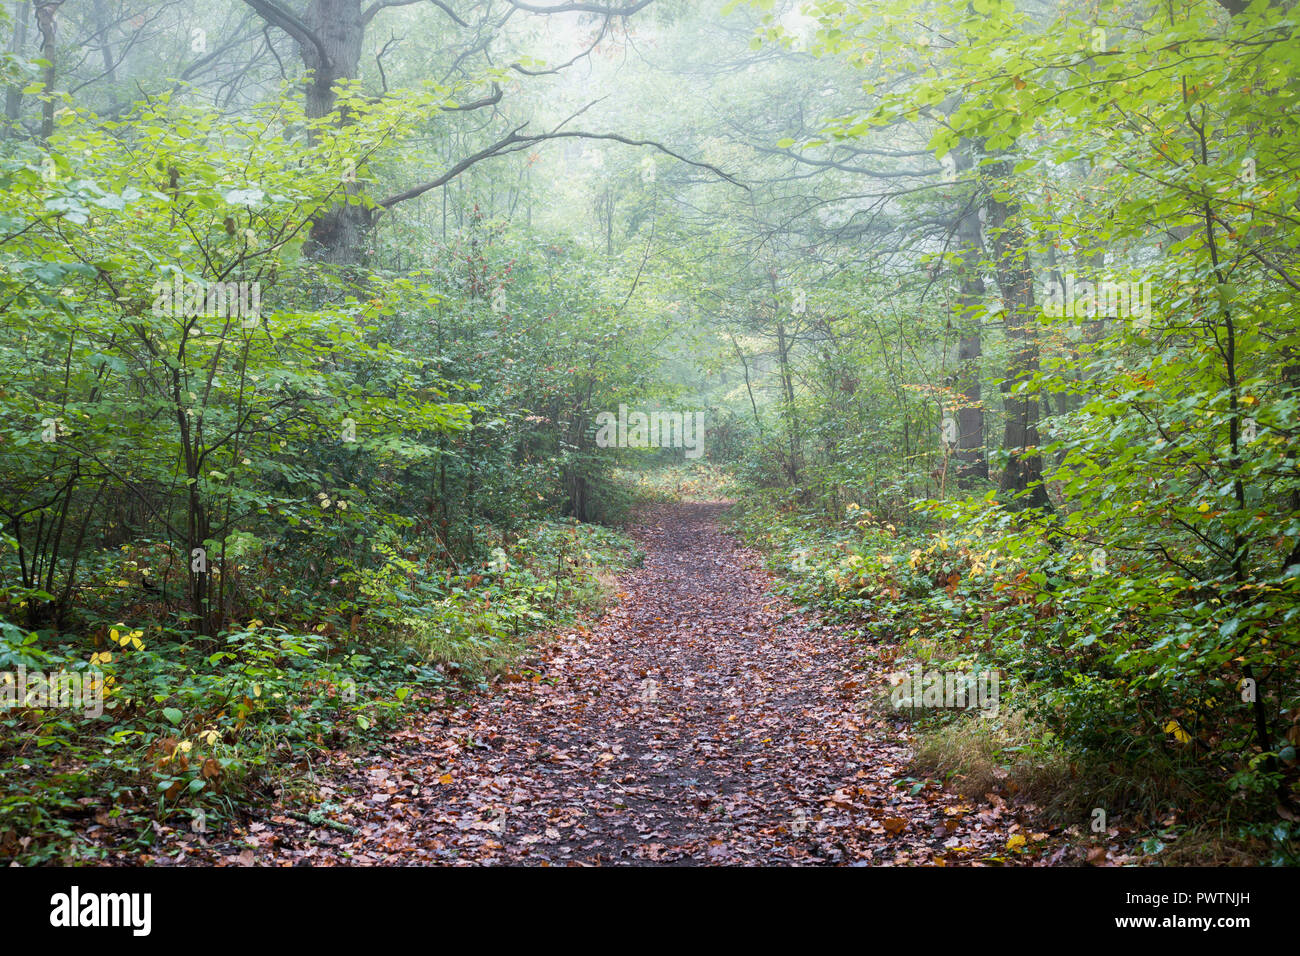 Misty October afternoon in part of the ancient woodland of The Blean near Dunkirk, Kent, UK. A footpath is visible covered in autumn leaves. Stock Photo